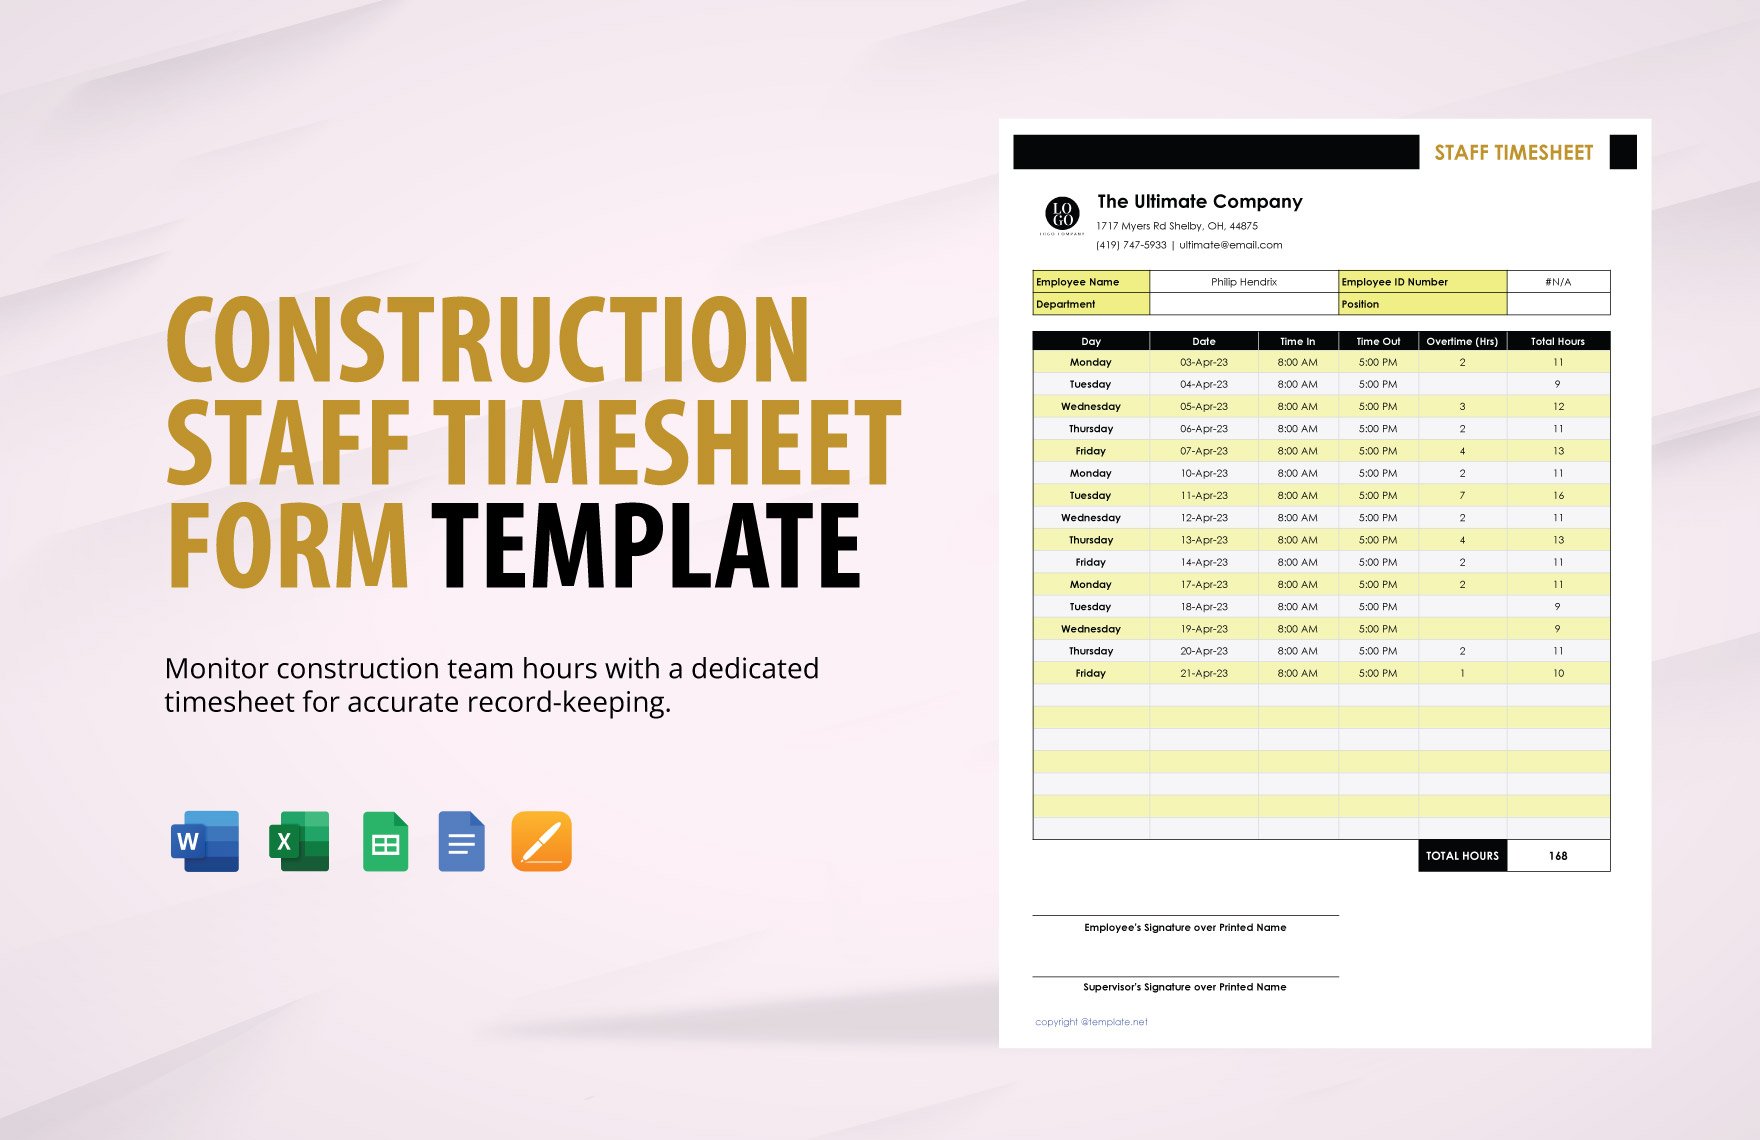 Construction Staff Timesheet Form Template in Word, Google Docs, Excel, Google Sheets, Apple Pages